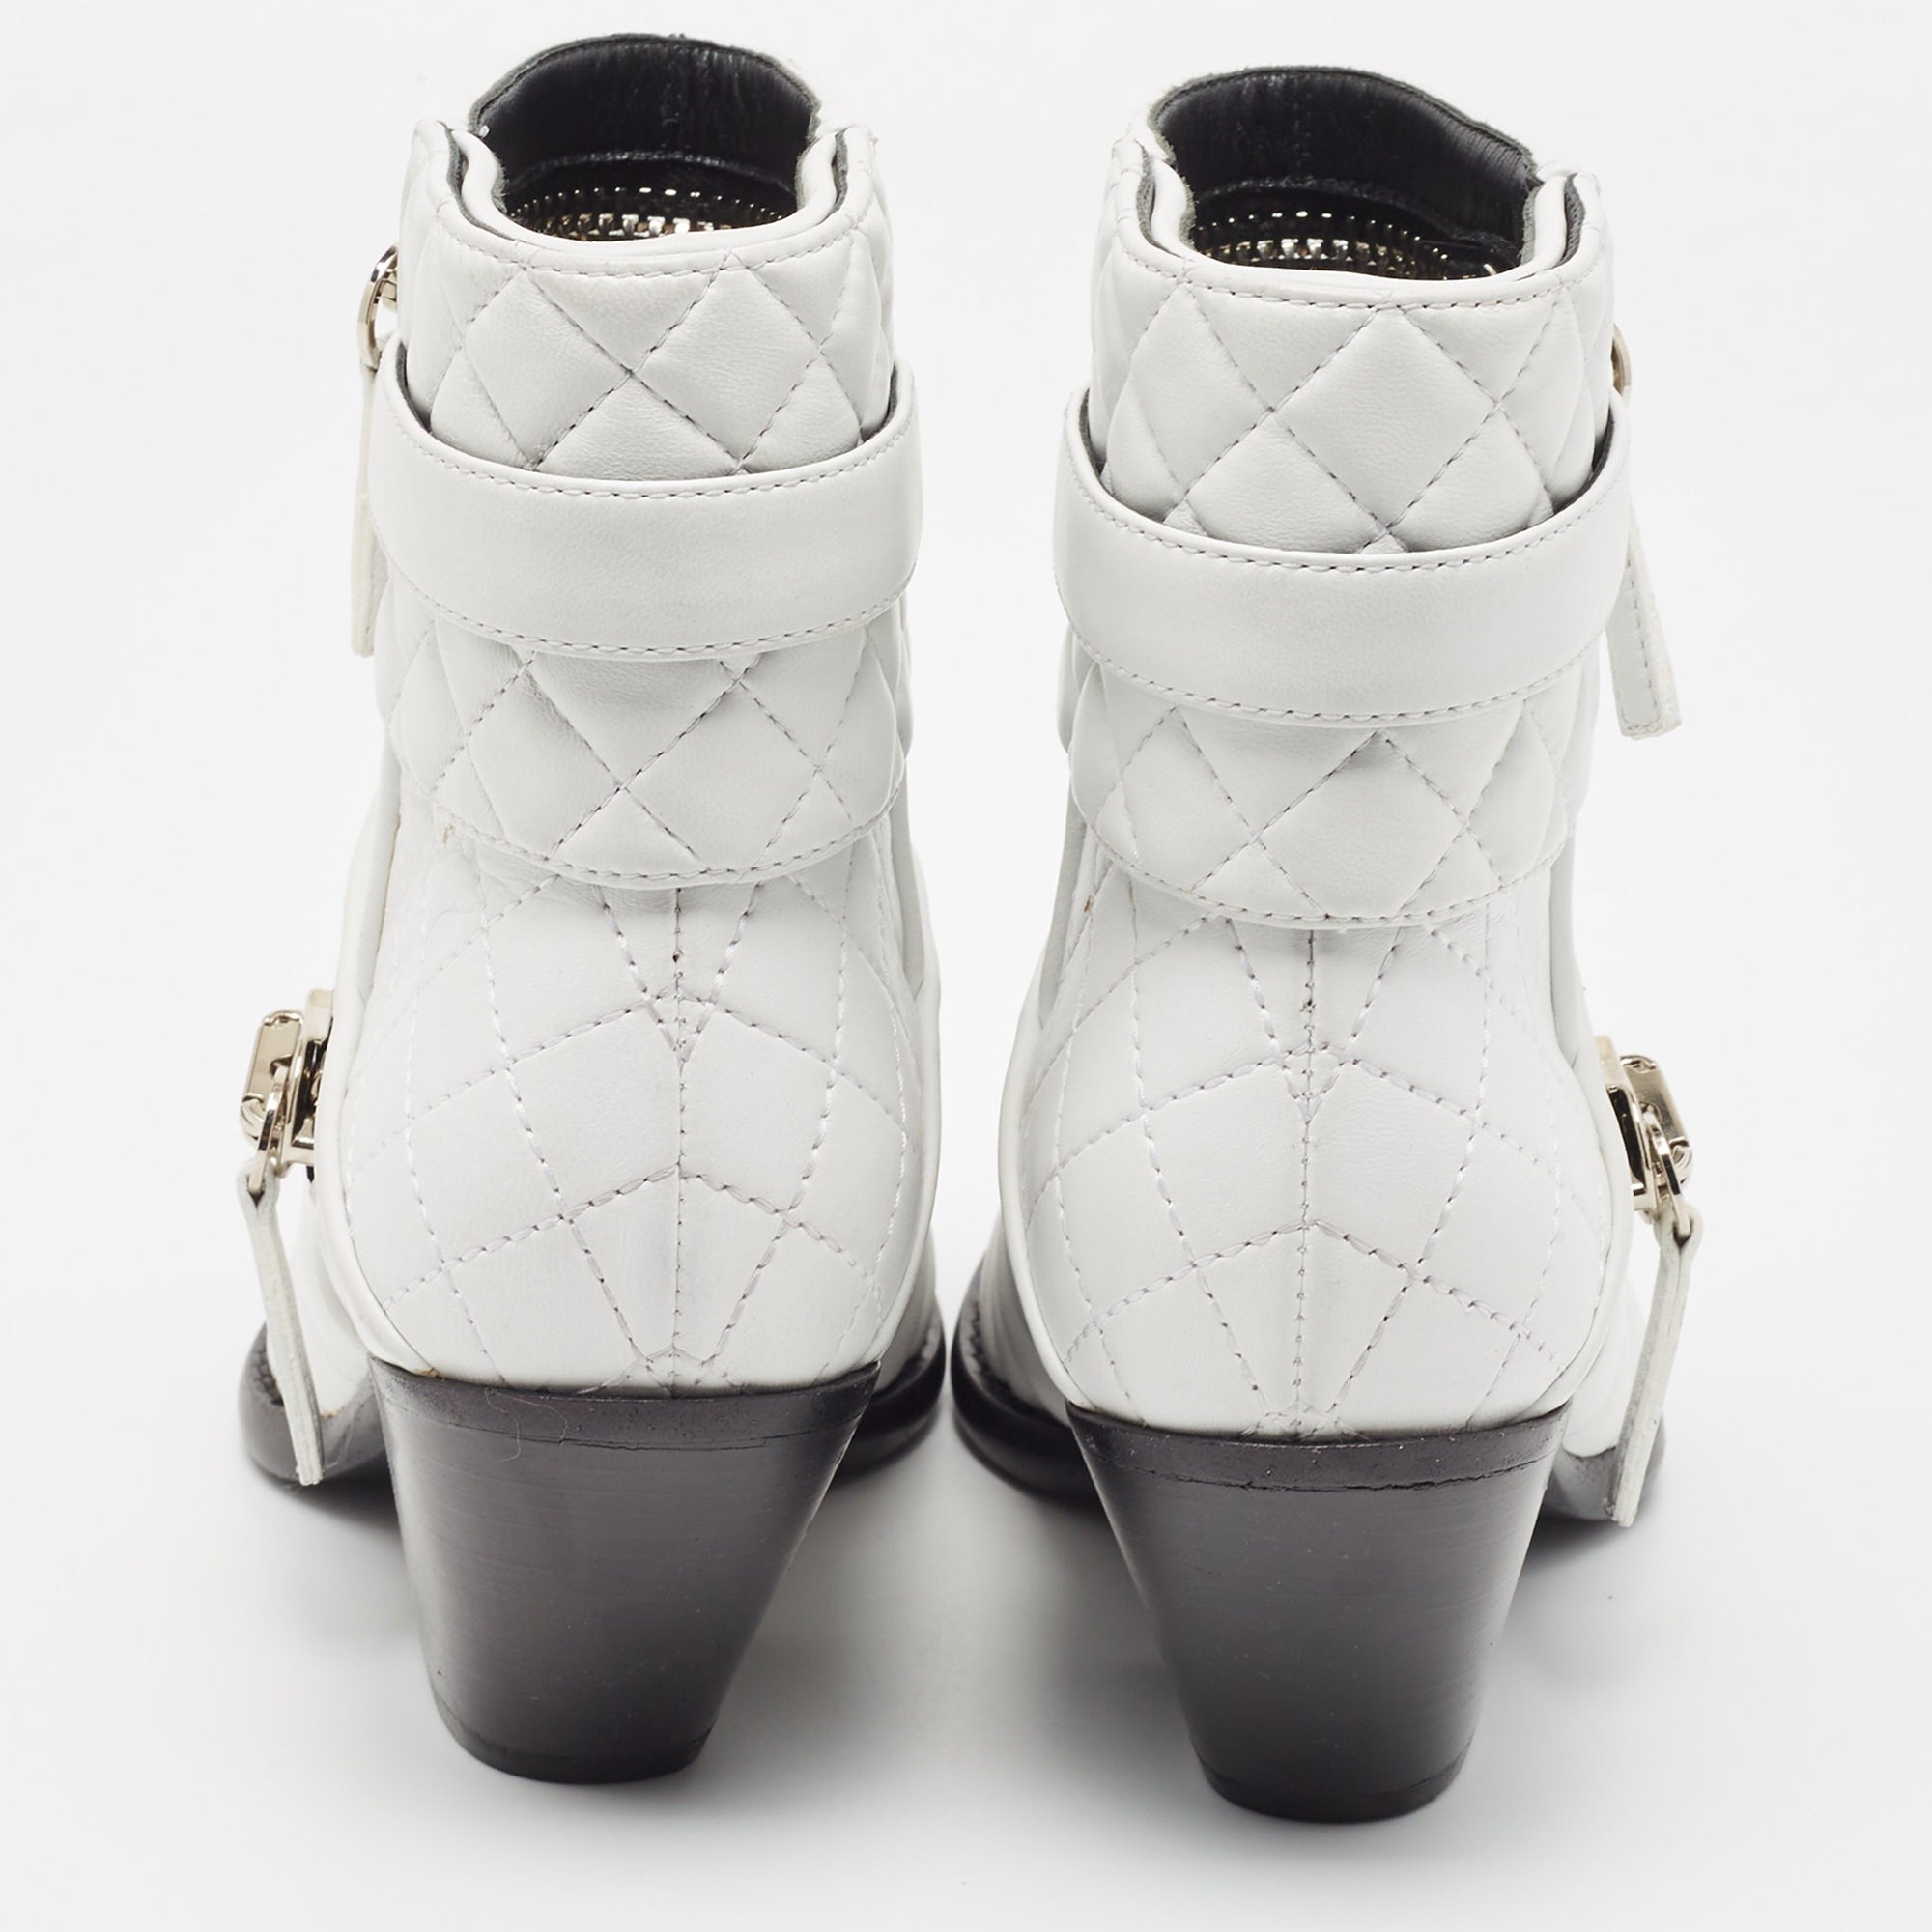 Giuseppe Zanotti White Quilted Leather Ankle Boots Size 37.5